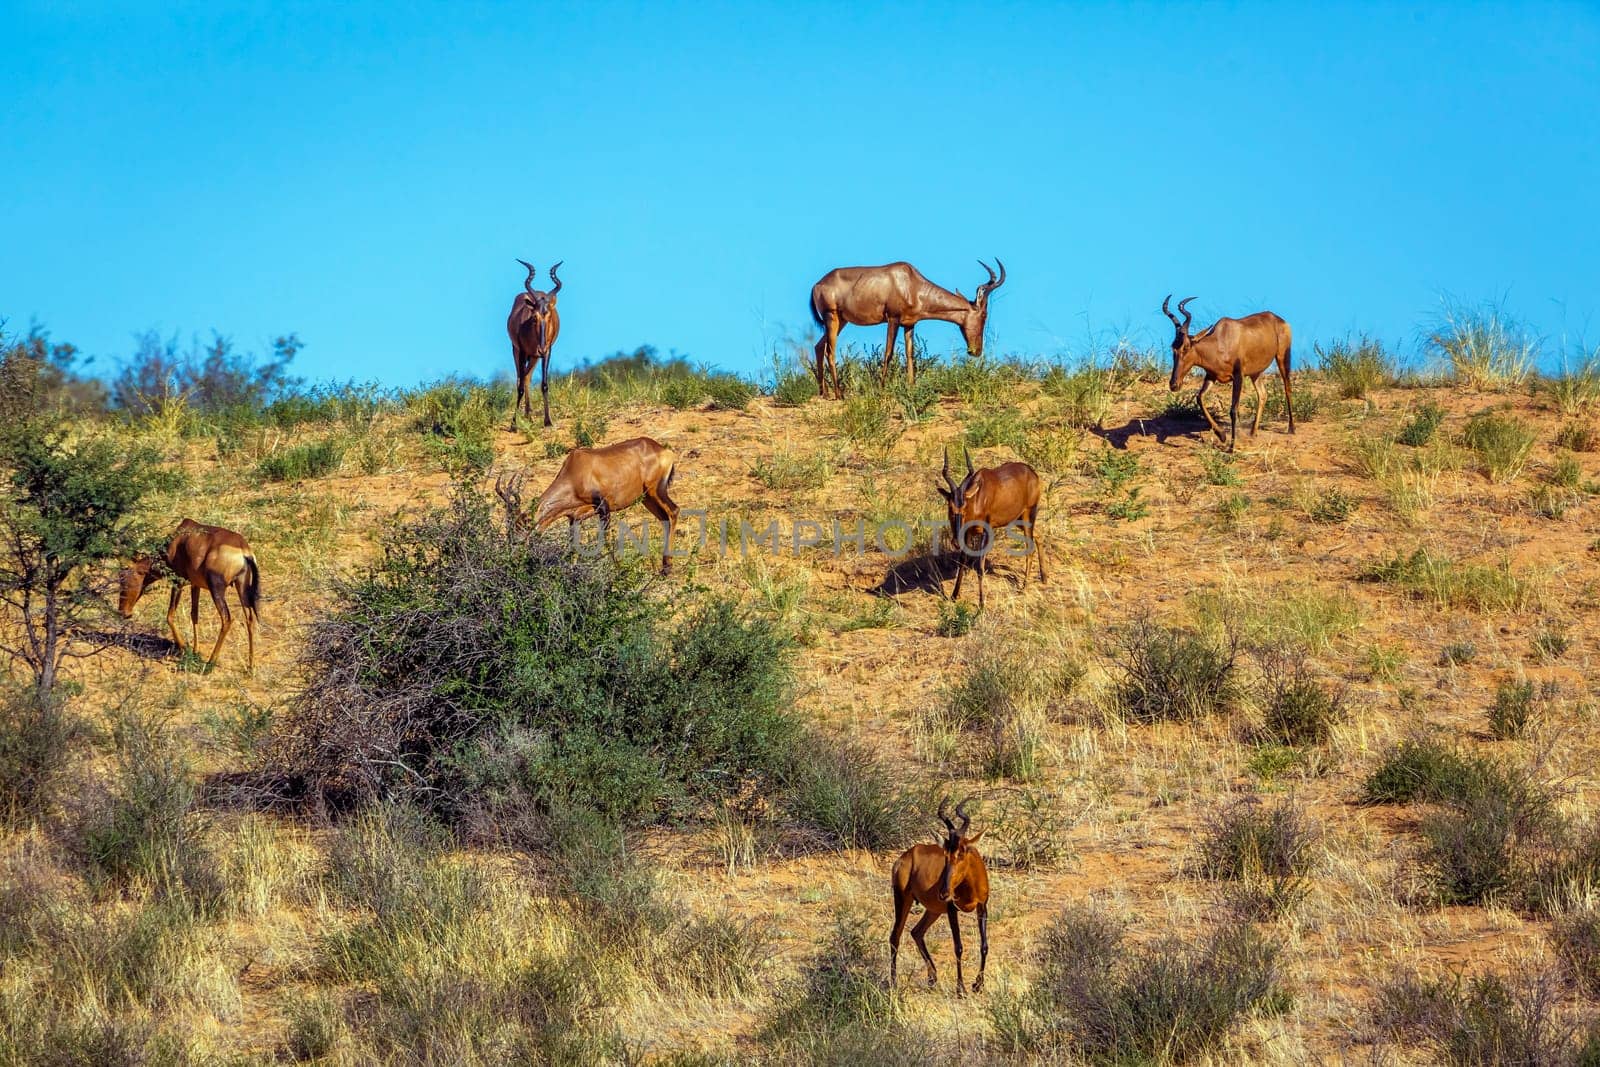 Red hartebeest in Kglalagadi transfrontier park, South Africa by PACOCOMO